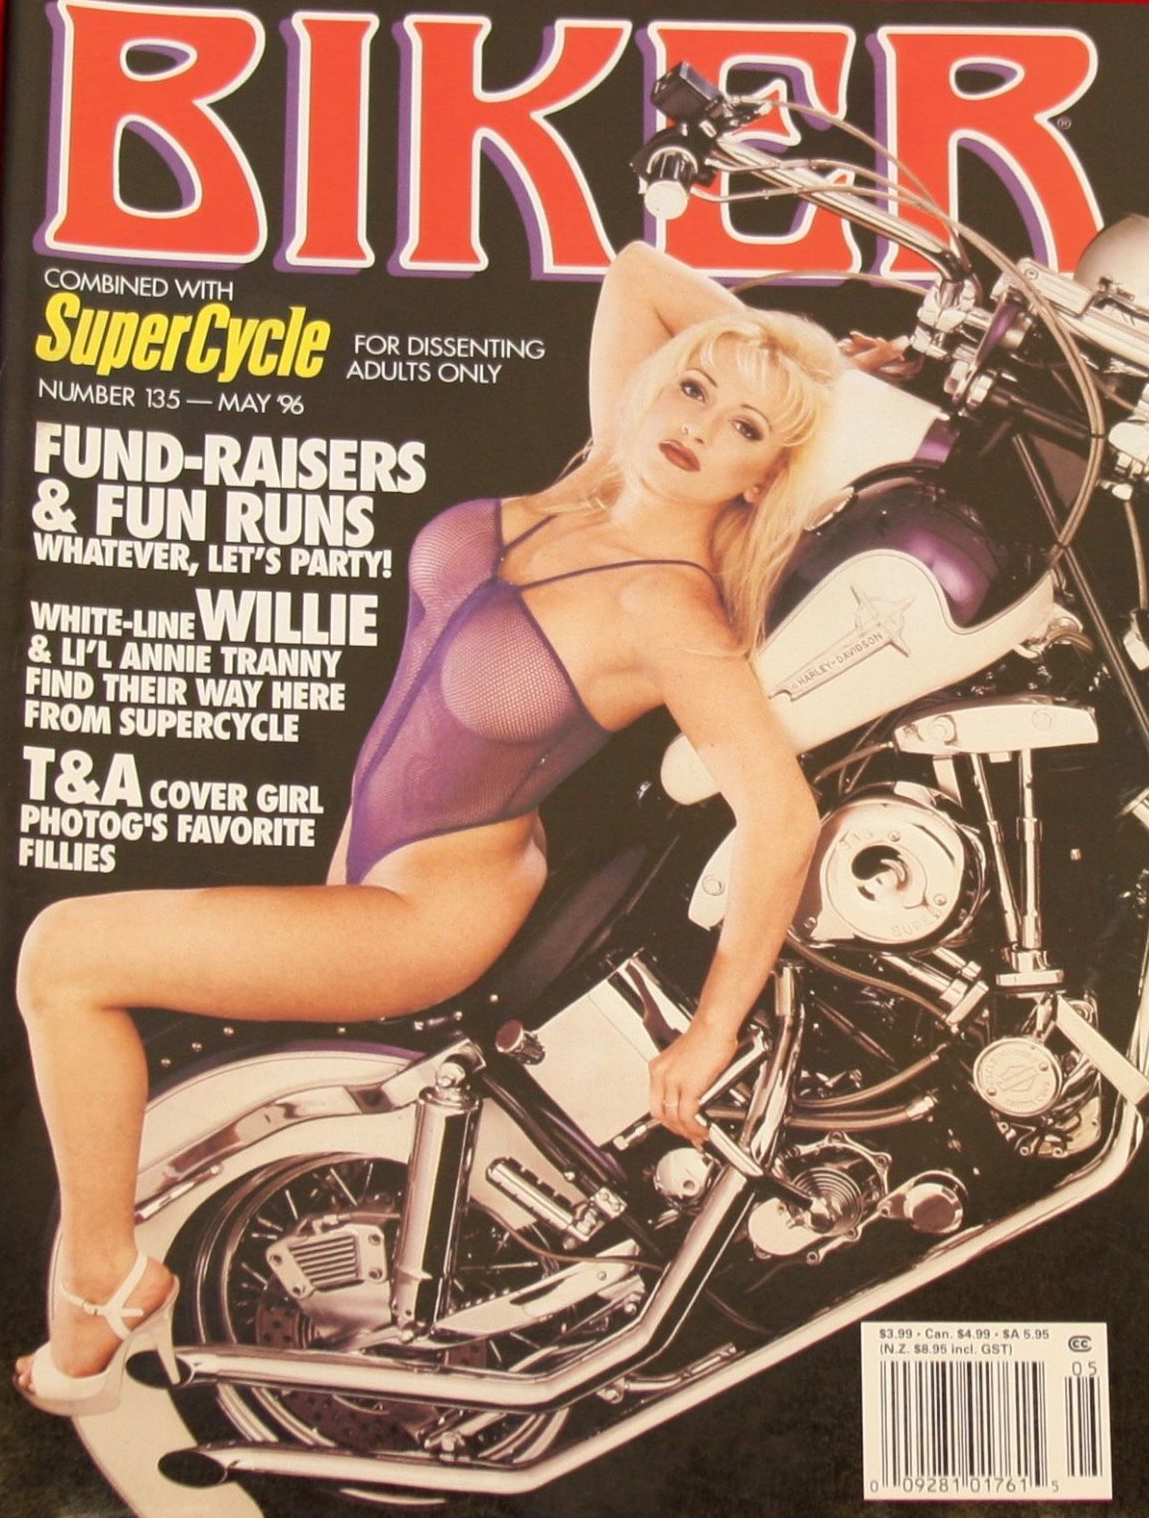 Biker May 1996 magazine back issue Biker magizine back copy Biker May 1996 Motorcycle Magazine Back Issue Published by Paisano Publications. Combined With SuperCycle.